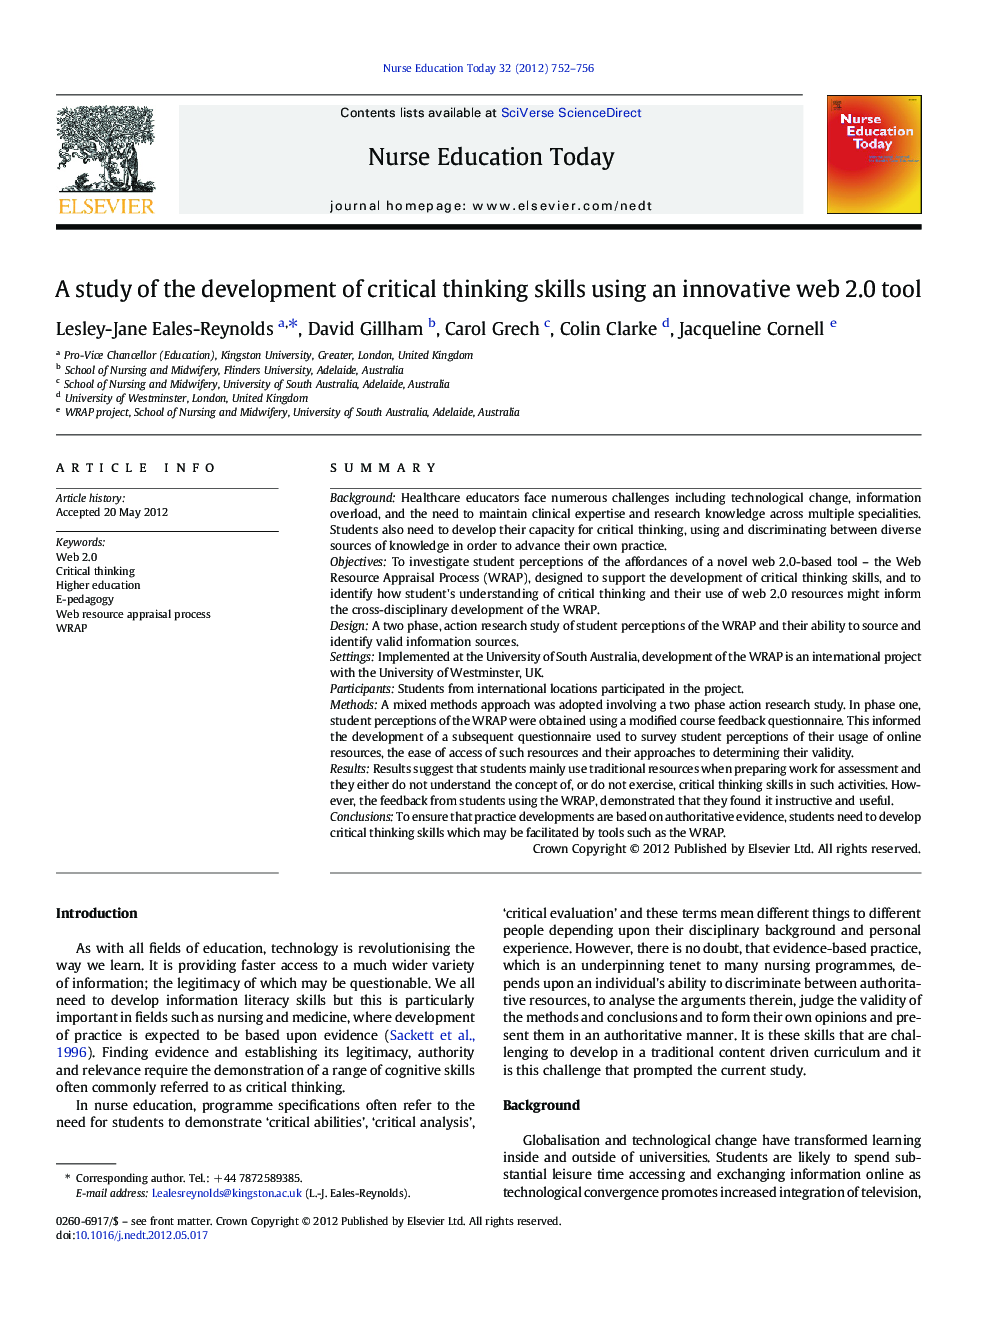 A study of the development of critical thinking skills using an innovative web 2.0 tool